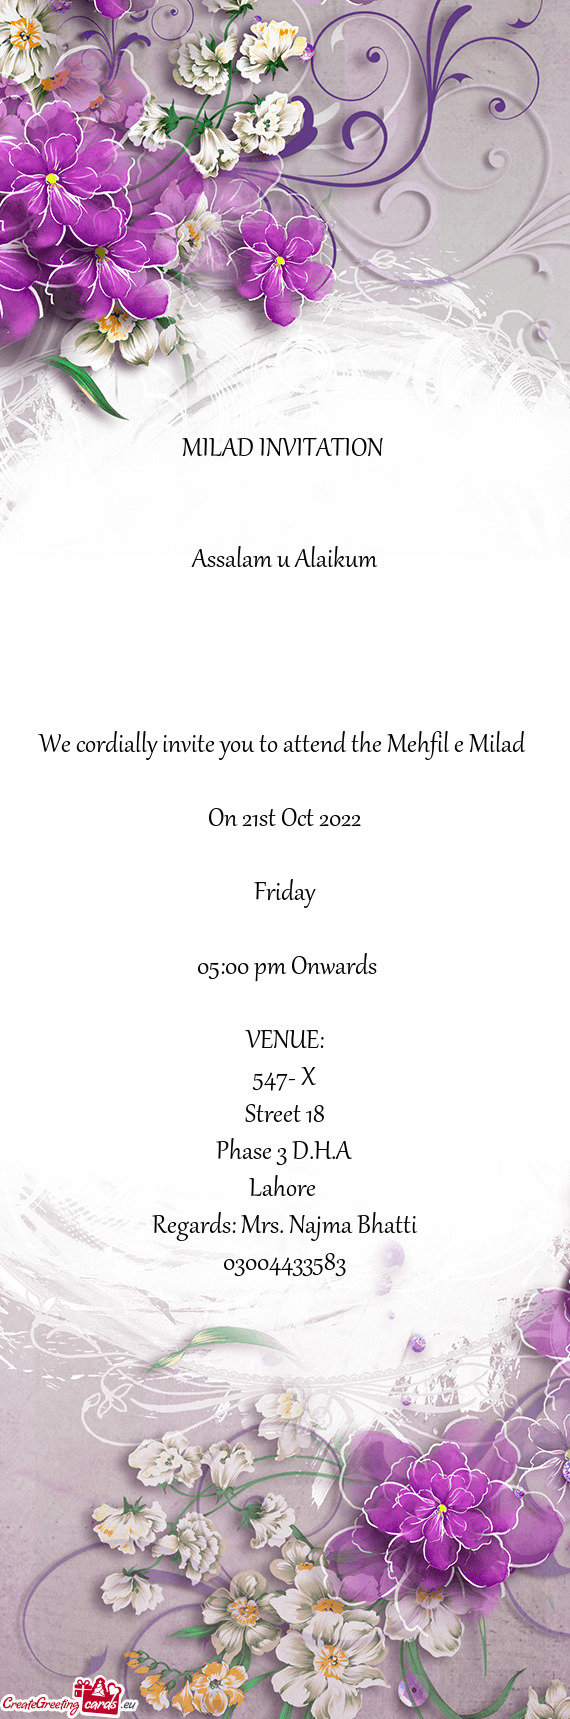 We cordially invite you to attend the Mehfil e Milad